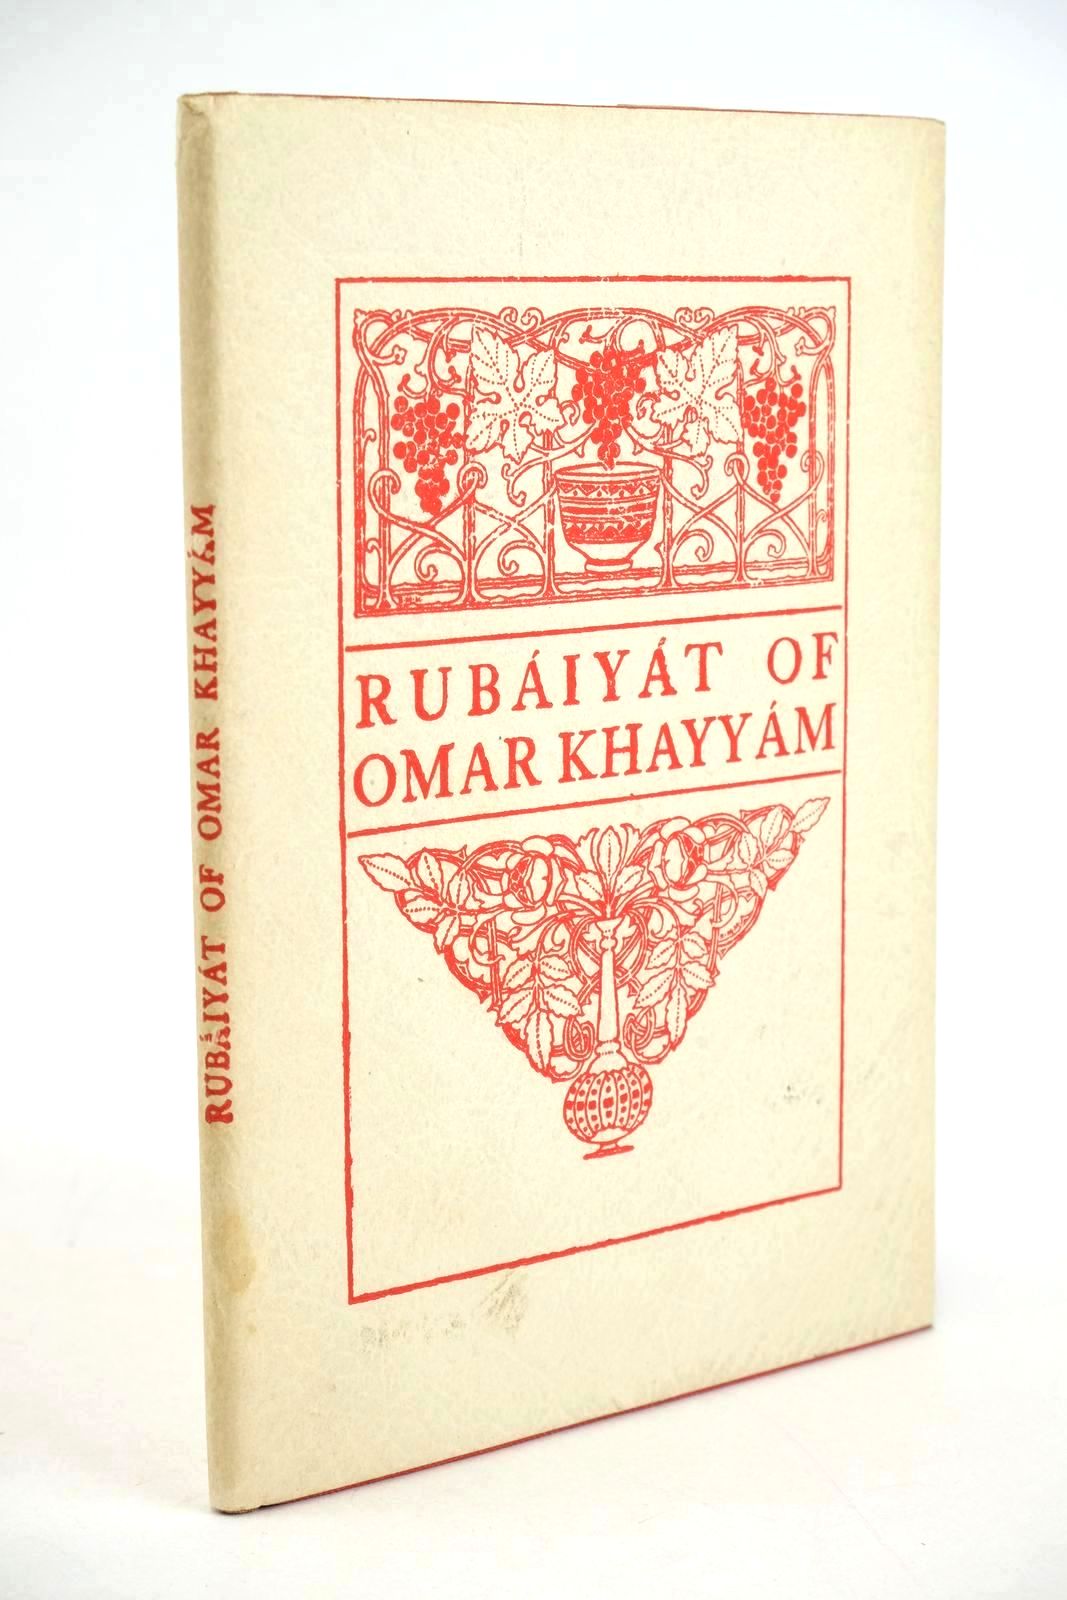 Photo of RUBAIYAT OF OMAR KHAYYAM written by Khayyam, Omar Fitzgerald, Edward illustrated by Macmanus, Blanche published by The De La More Press (STOCK CODE: 1327786)  for sale by Stella & Rose's Books